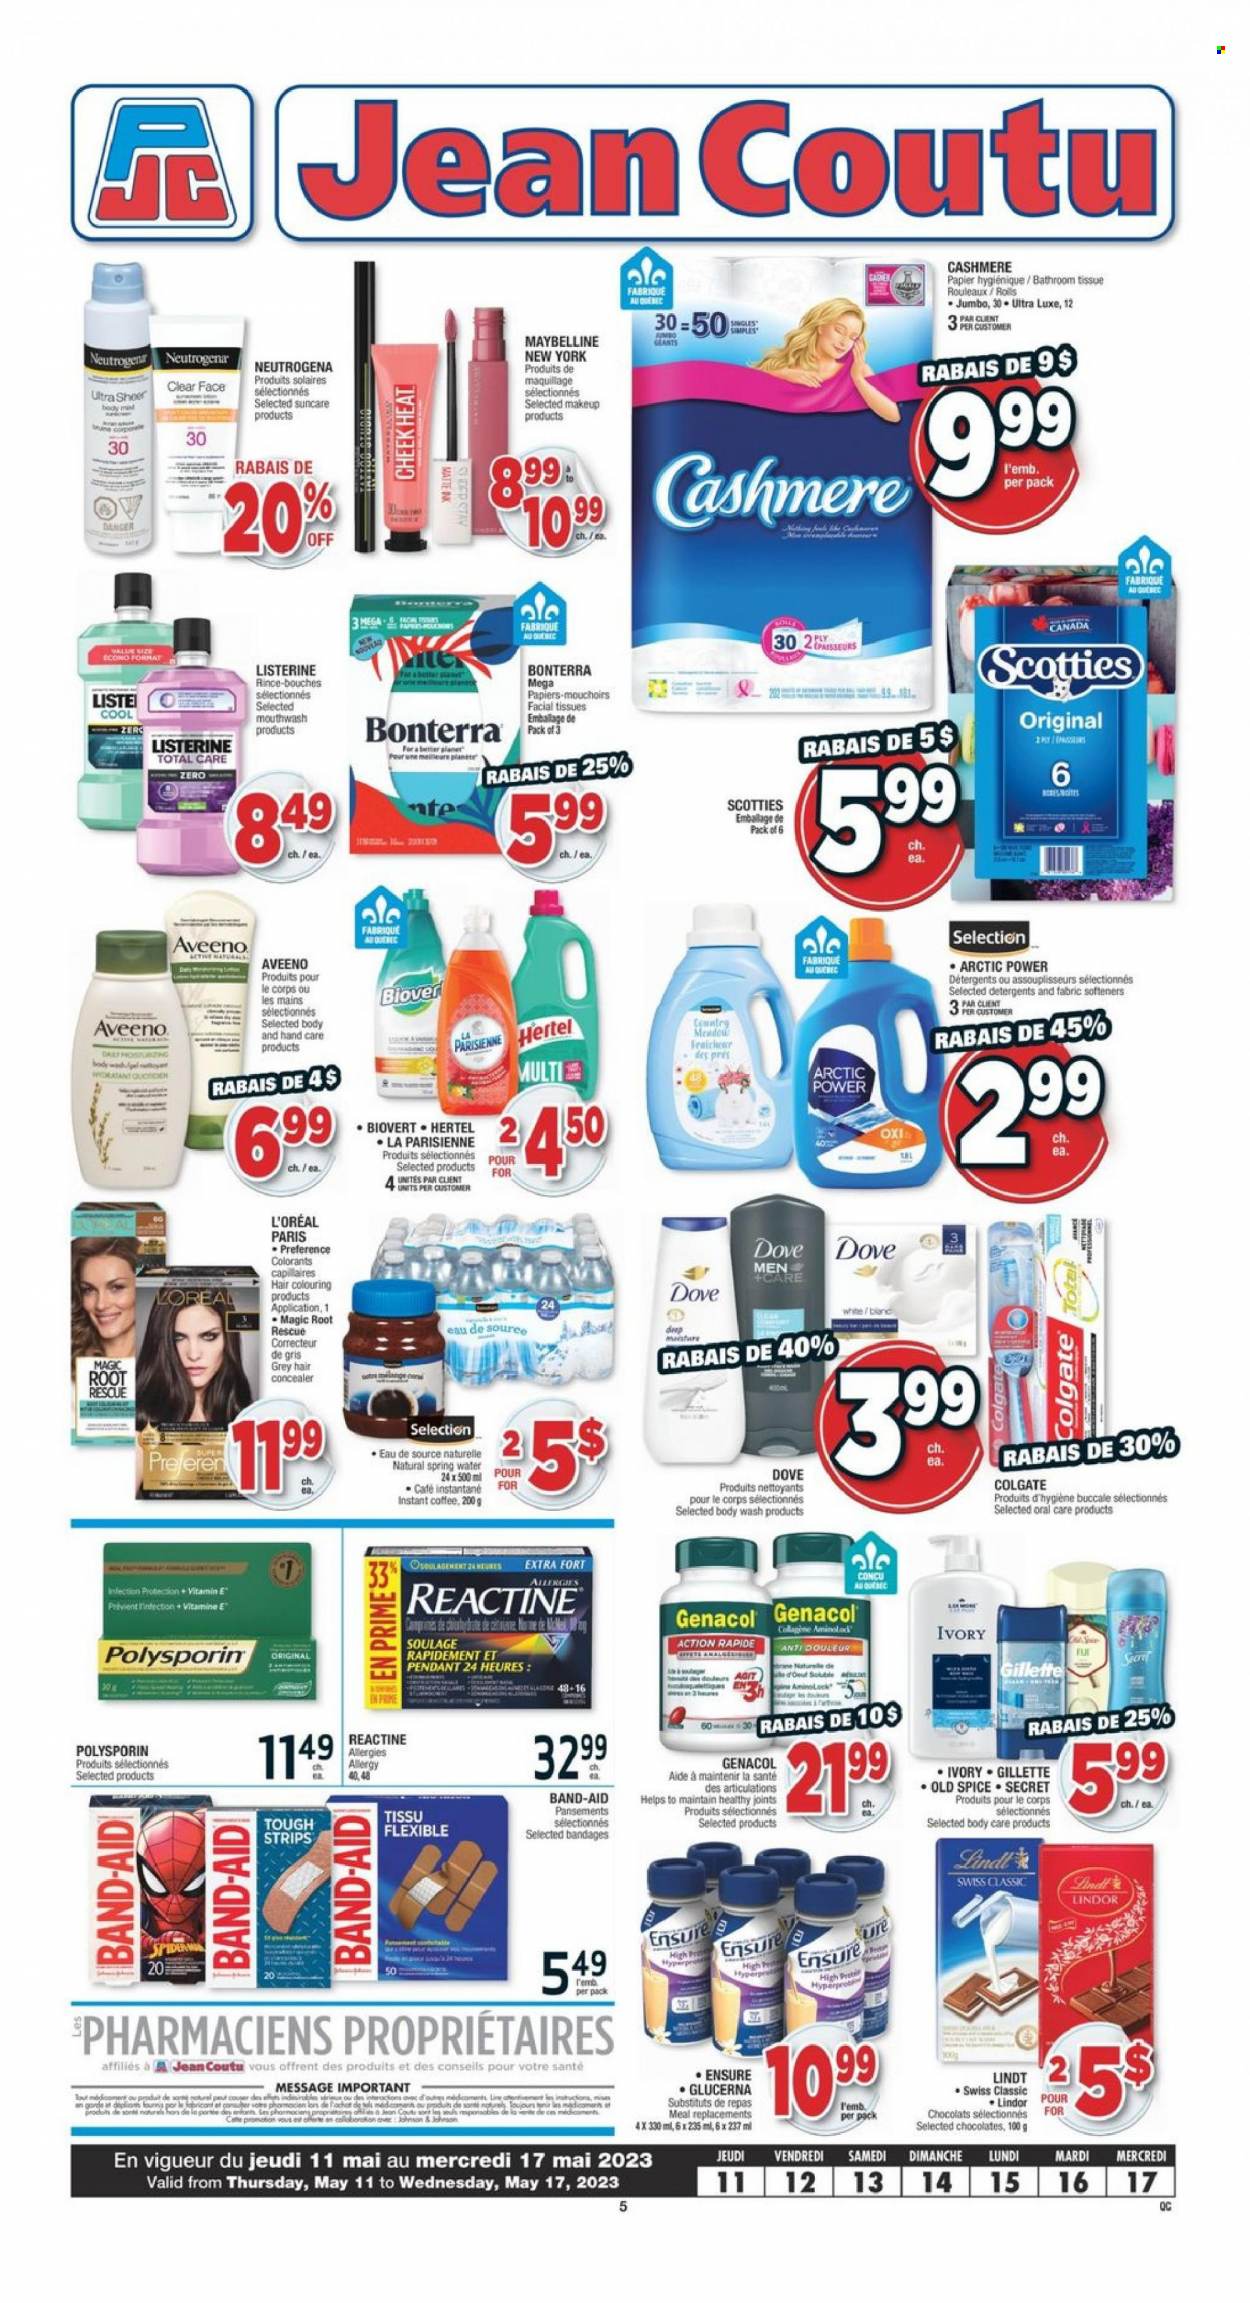 thumbnail - Jean Coutu Flyer - May 11, 2023 - May 17, 2023 - Sales products - Dove, chocolate, spring water, water, coffee, instant coffee, Johnson's, Aveeno, bath tissue, body wash, mouthwash, facial tissues, Gillette, L’Oréal, corrector, makeup, Maybelline, pendant, Glucerna, band-aid, Colgate, Listerine, Neutrogena, Old Spice, Lindt, Lindor. Page 1.